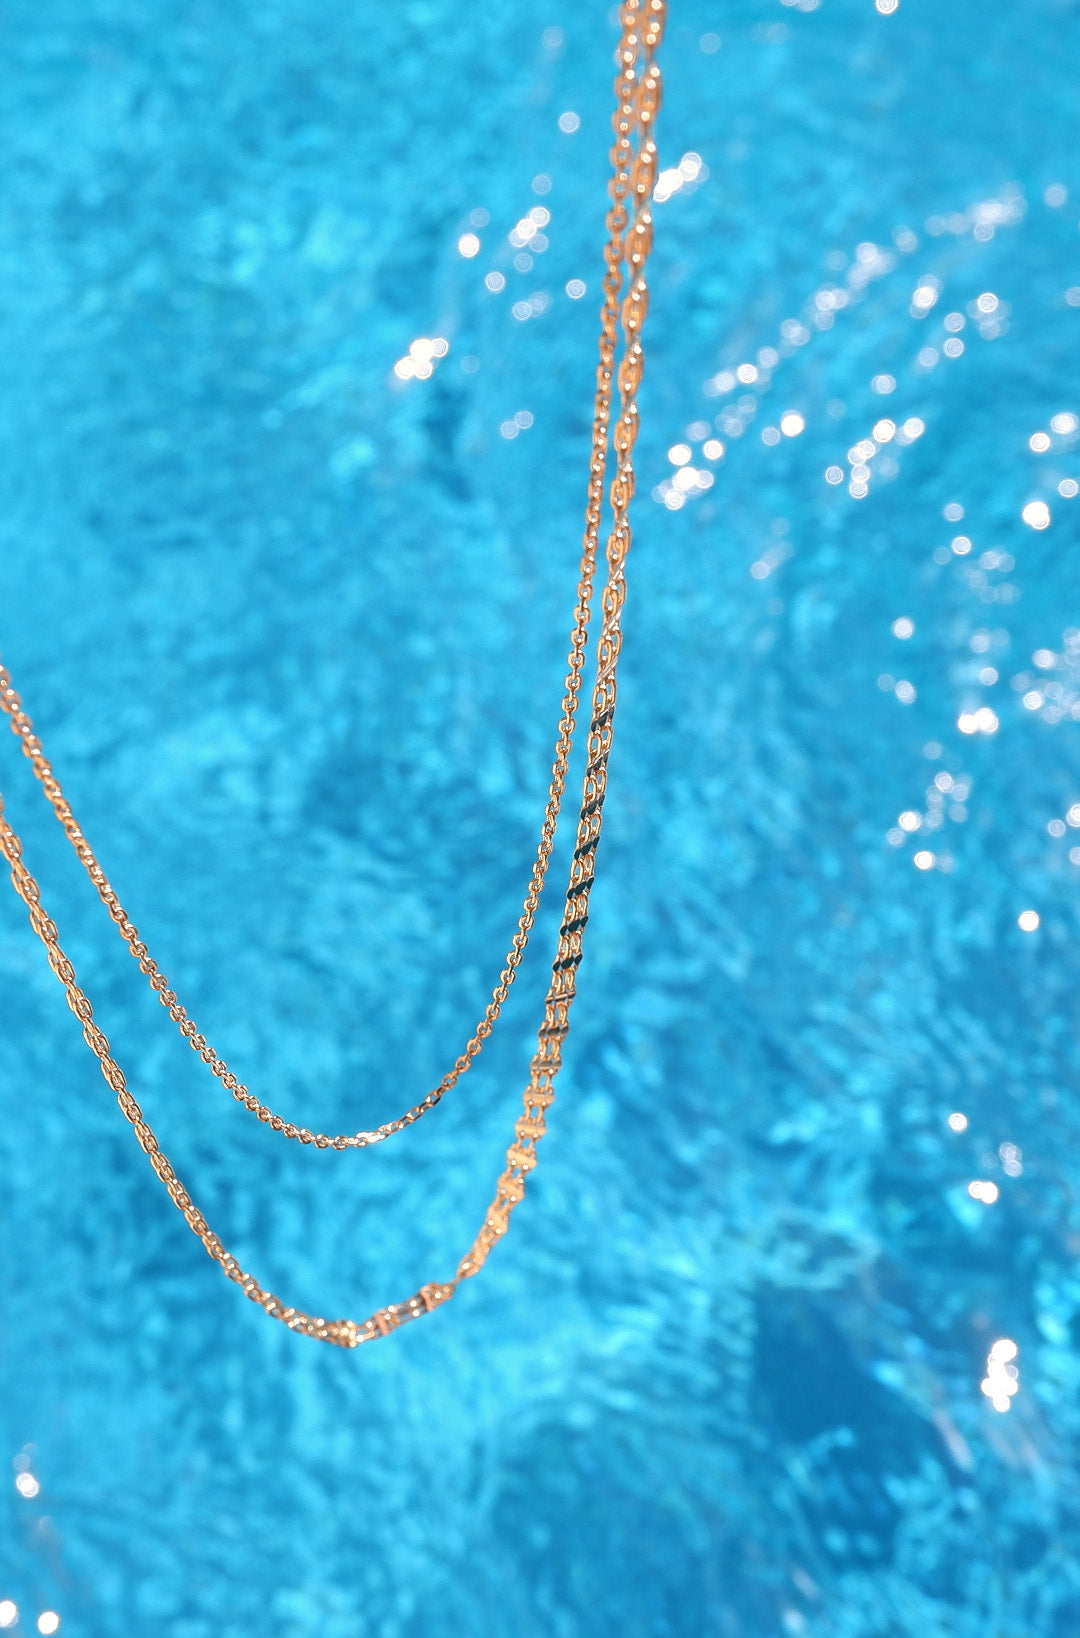 Glamour and durability unite in our gold-plated and silver necklace, a chic addition to your ensemble from our diverse jewellery collection.